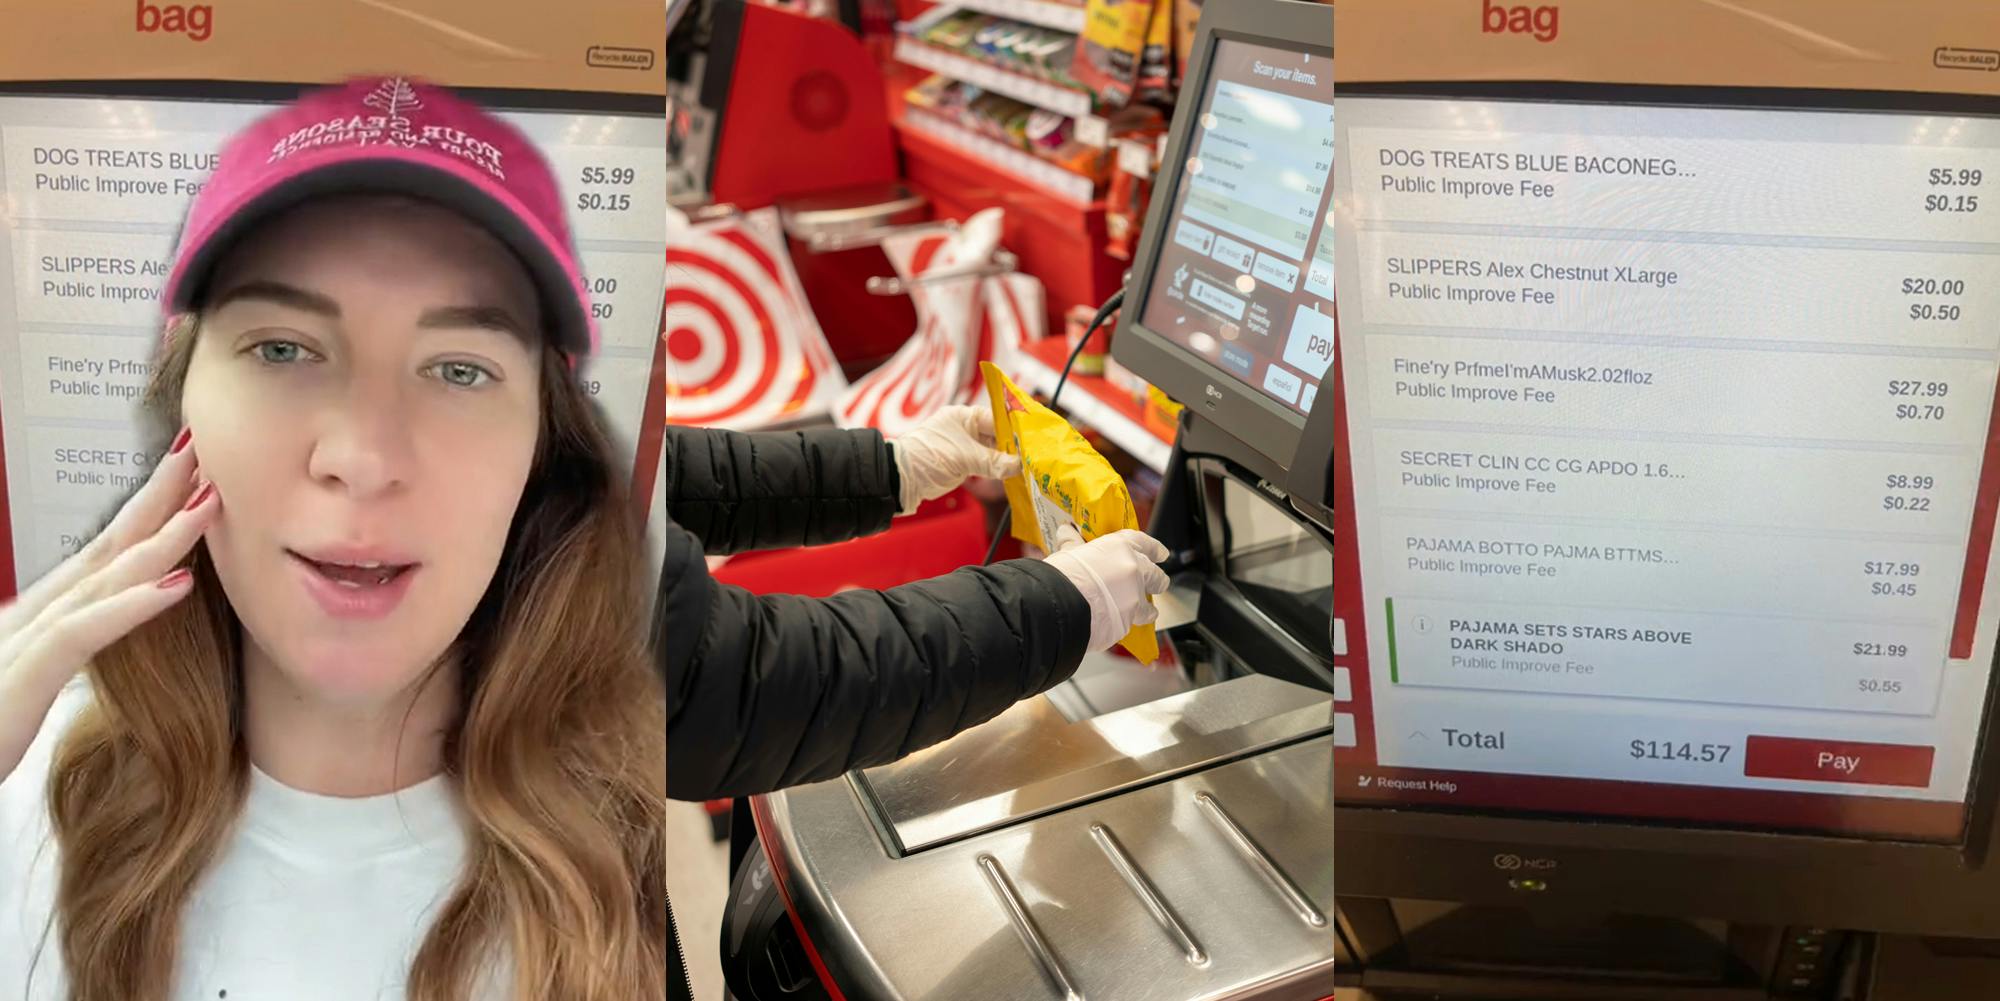 Target customer greenscreen TikTok over Target self checkout charges ad total (l) woman using Target self checkout (c) Target self checkout screen showing "Public Improvement Fee"' on every item (r)